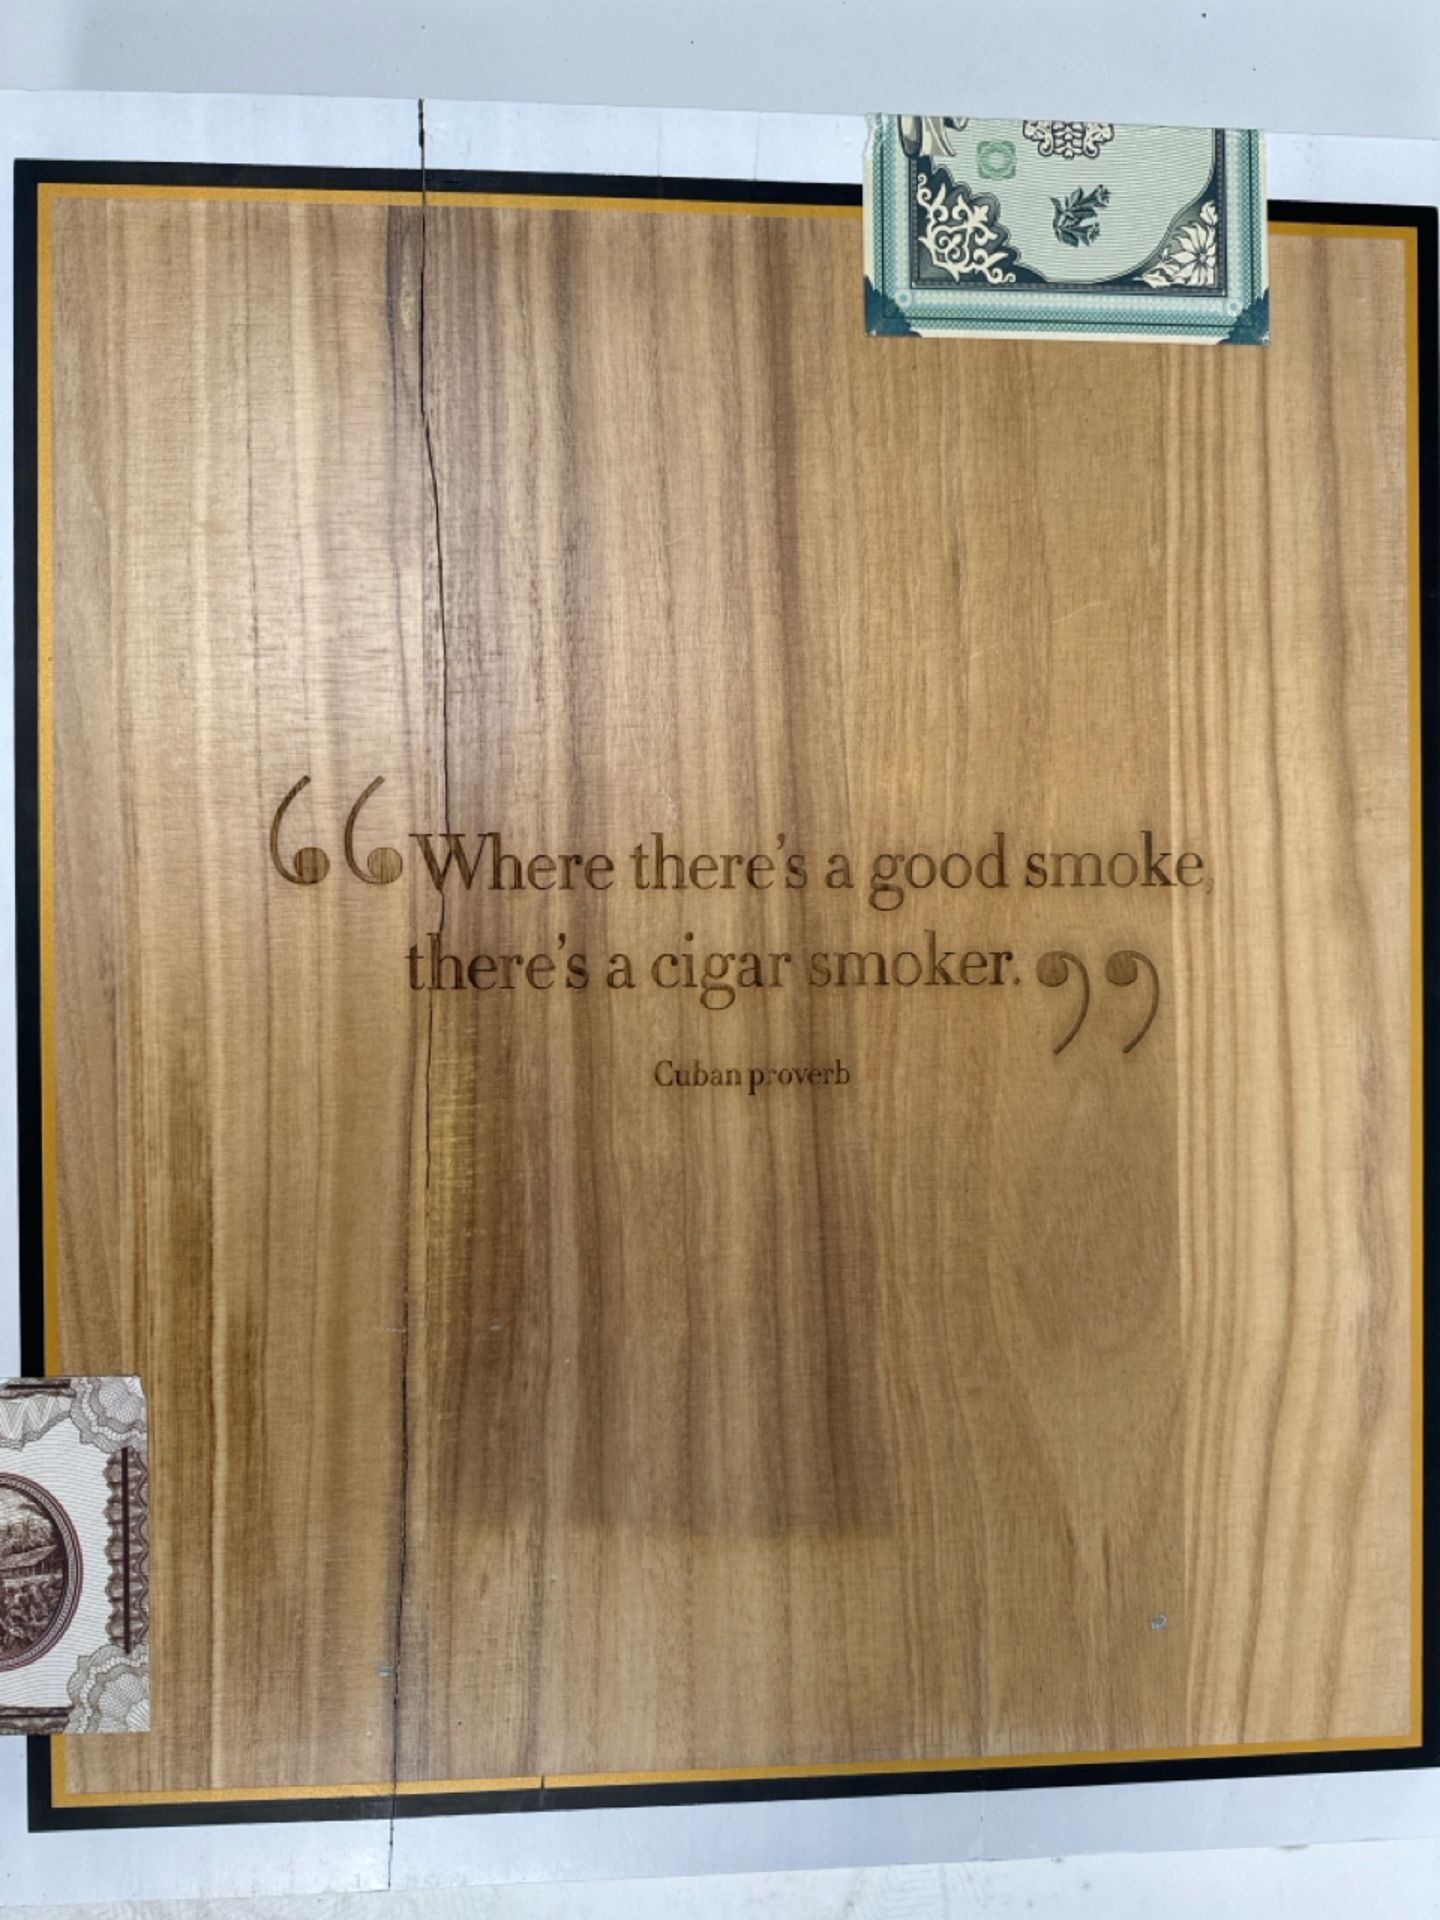 The Impossible Collection Of Cigars Book - Image 4 of 4